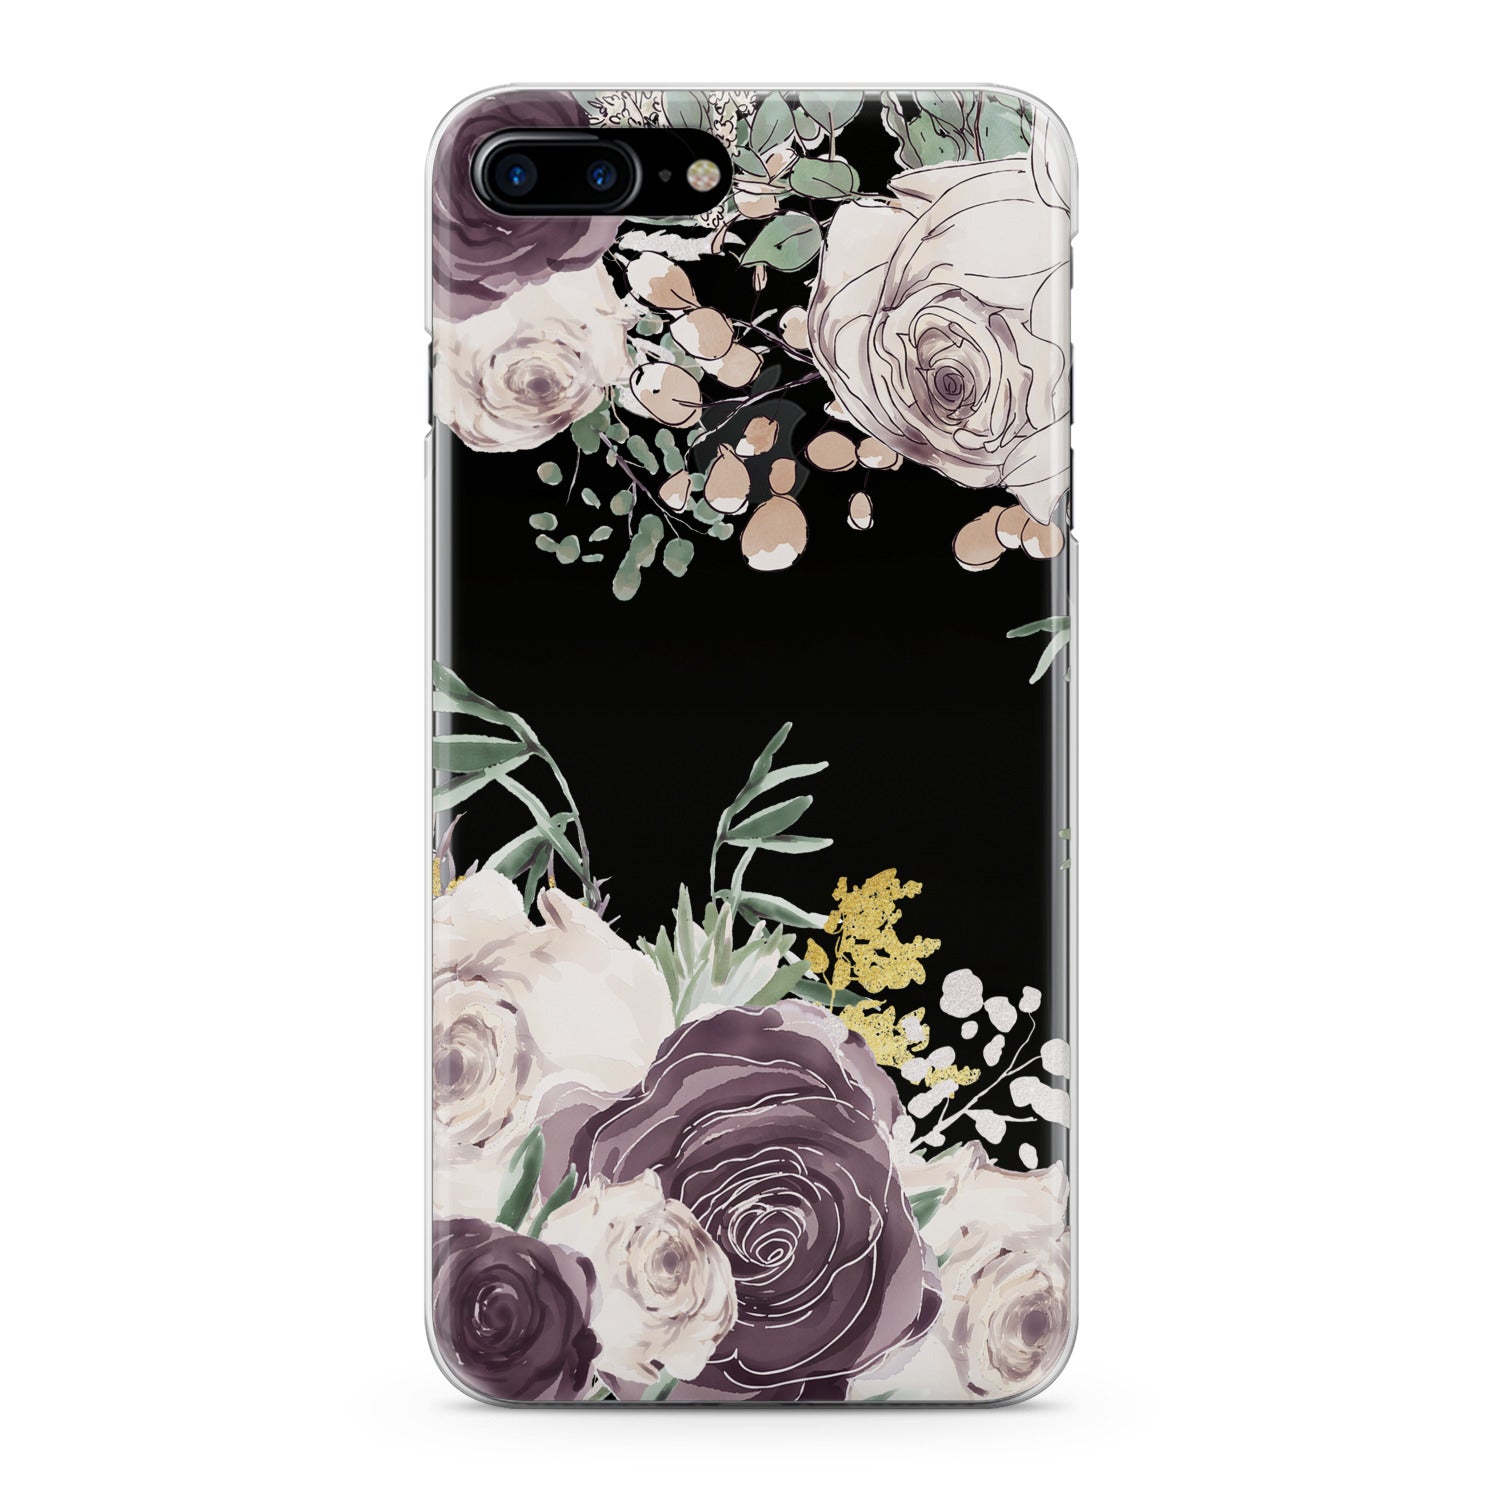 Lex Altern Beige Roses Phone Case for your iPhone & Android phone.